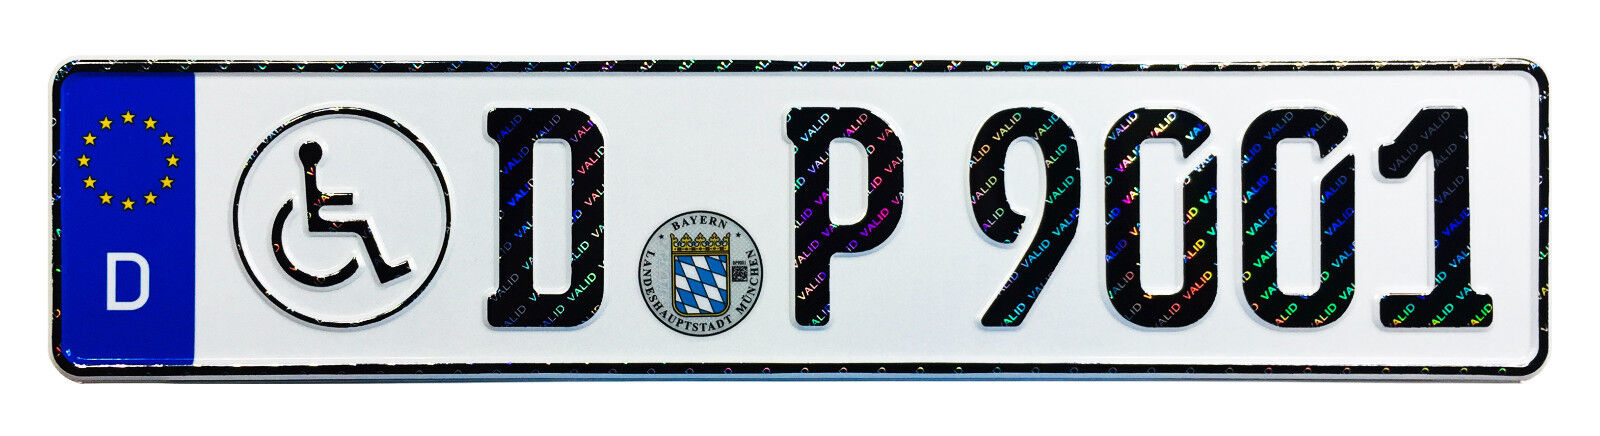 Disabled Person Handicap German License Plate with Hologram